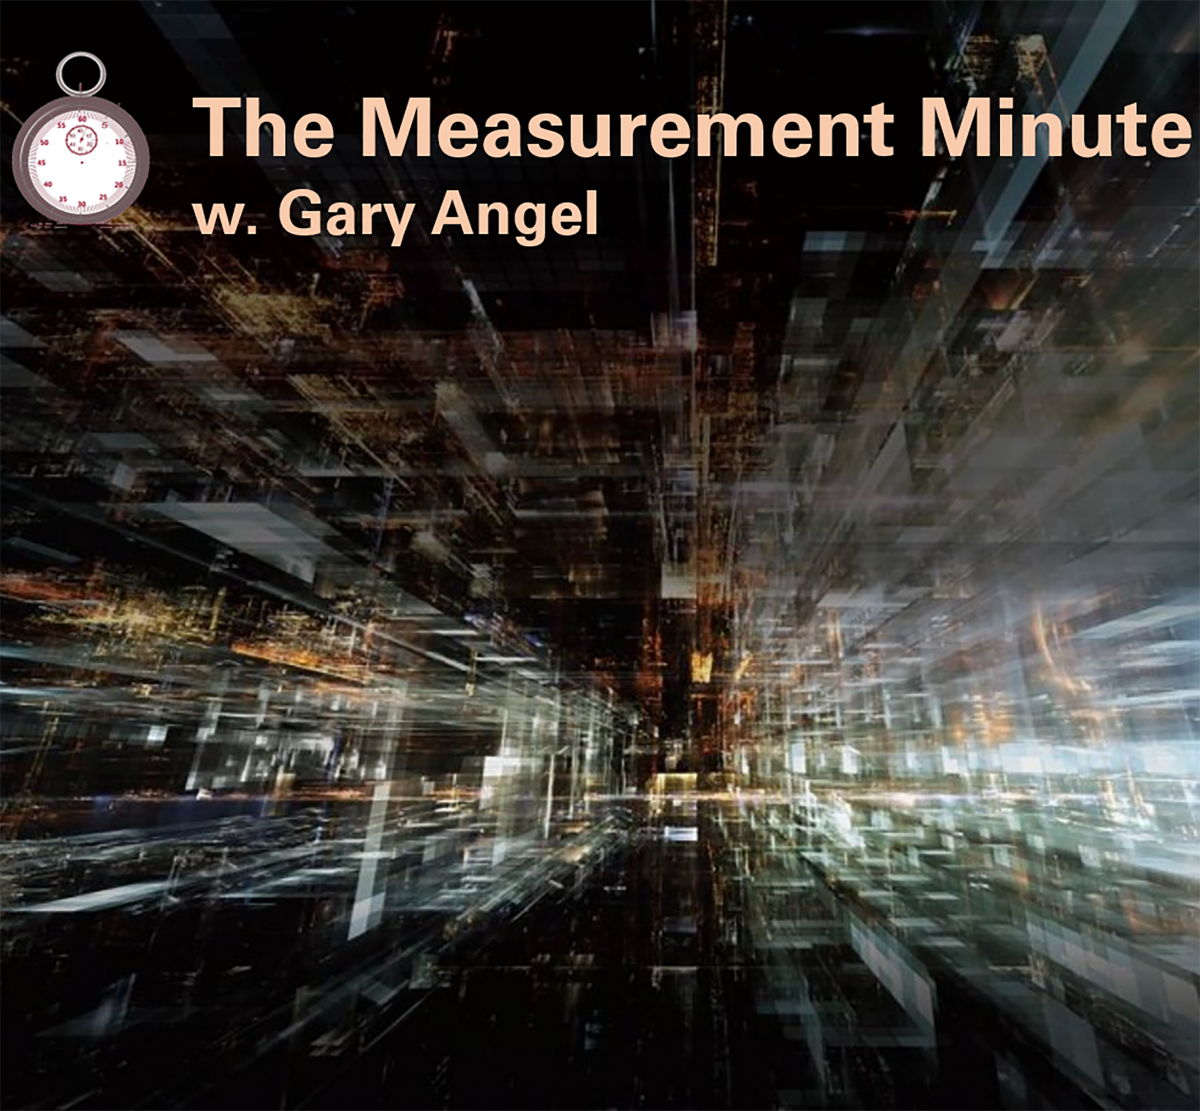 The Measurement Minute Podcast with Gary Angel